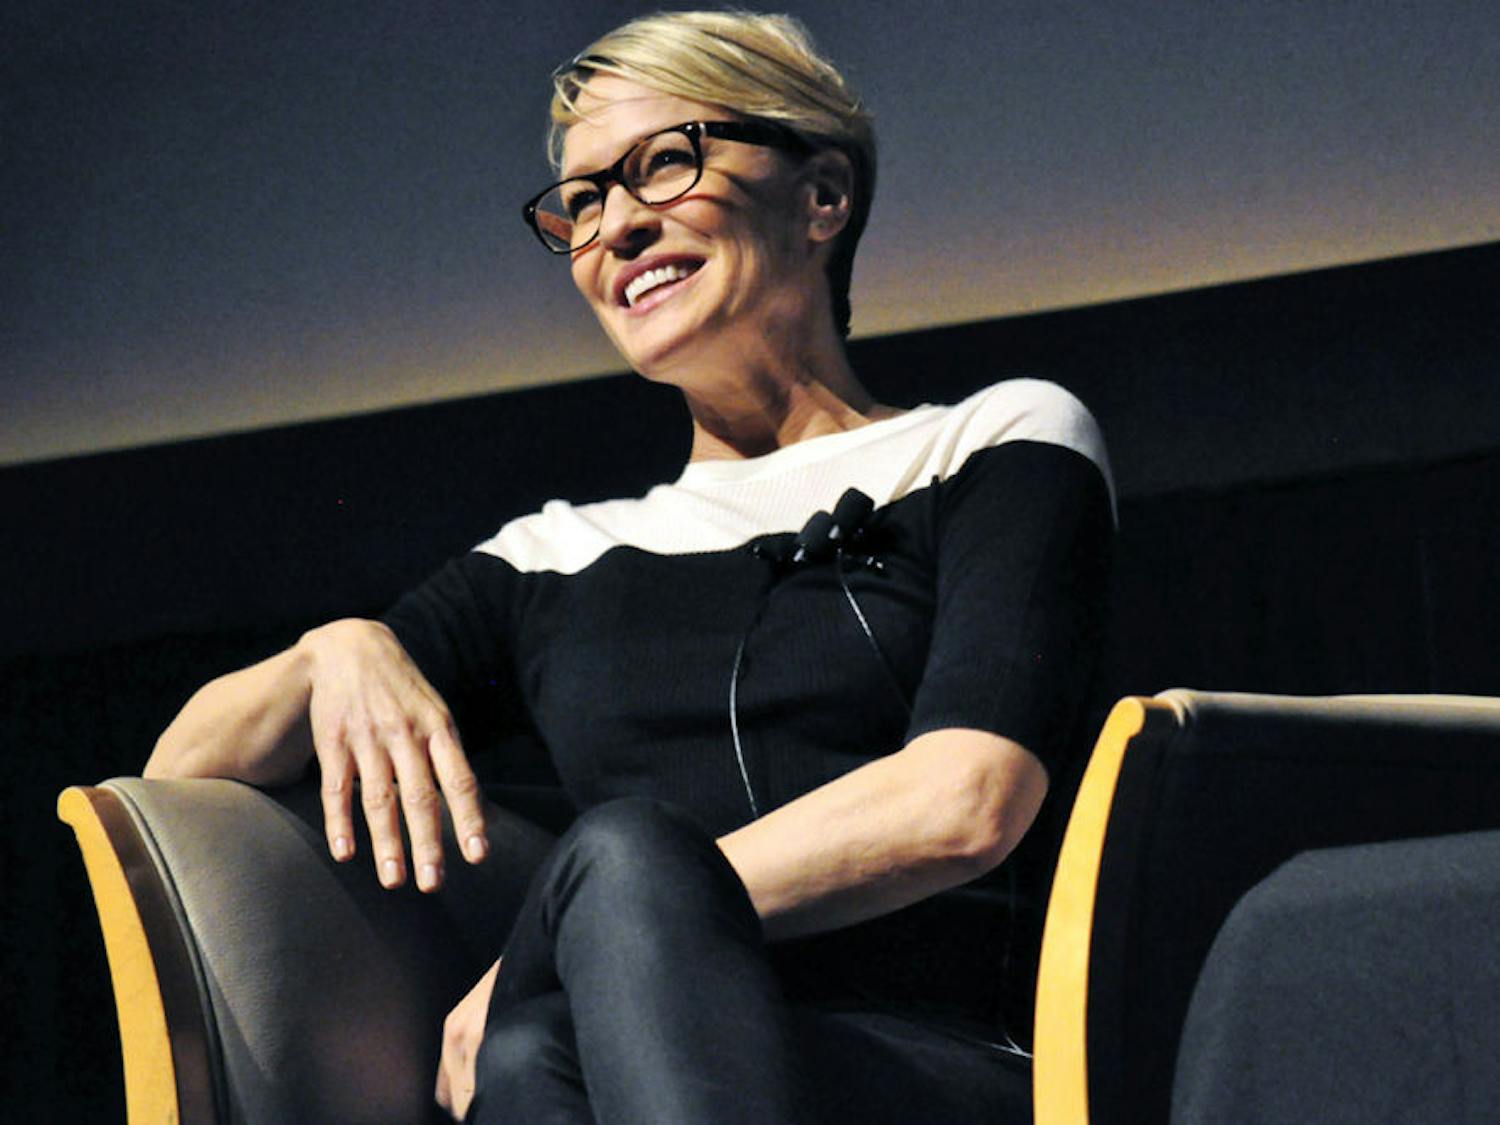 Robin Wright, actress from “The Princess Bride,” and “House of Cards,” speaks at an Accent Speaker's Bureau event at the Philips Center of Performing Arts on Thursday. Wright spoke about getting back into TV, life on the House of Cards set and how she related to her characters. "Give me something challenging," she said while discussing roles she'd turned down. "Give me something that I'm afraid of."